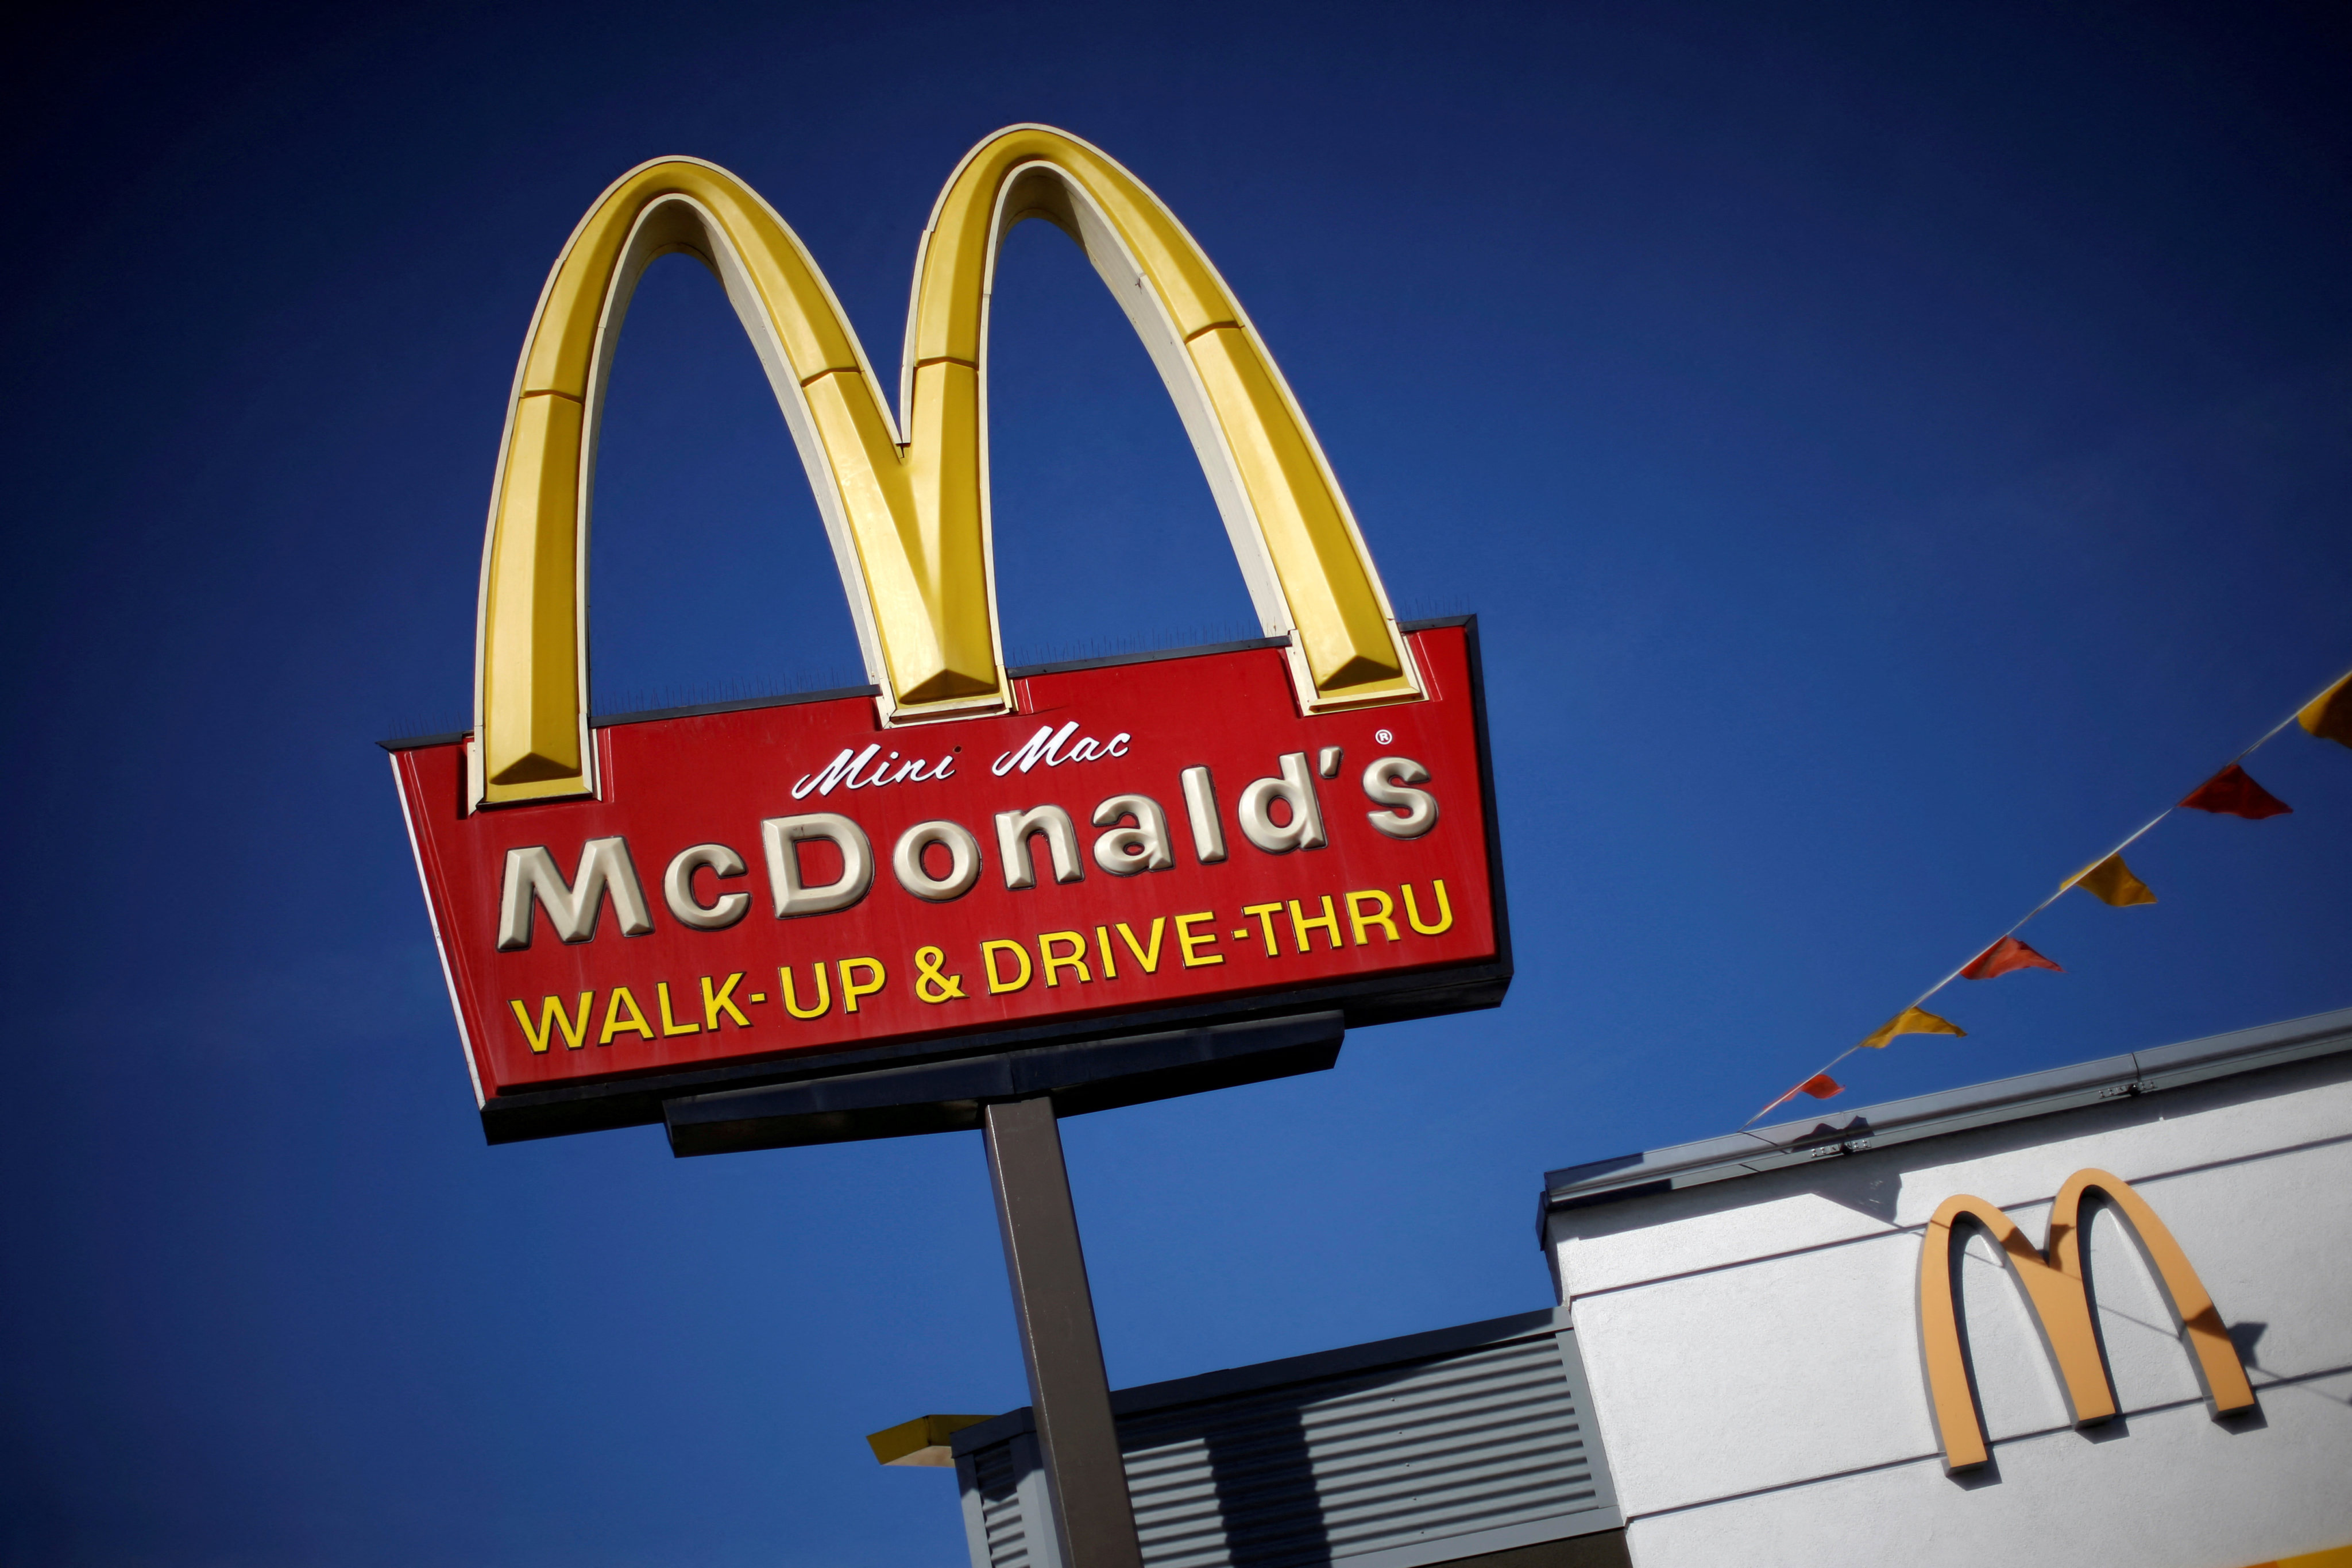 McDonald’s was famously ordered to pay US$3 million to a New Mexico woman in 1994 after a spilled cup of coffee left her with third-degree burns on her thighs. Photo: Reuters